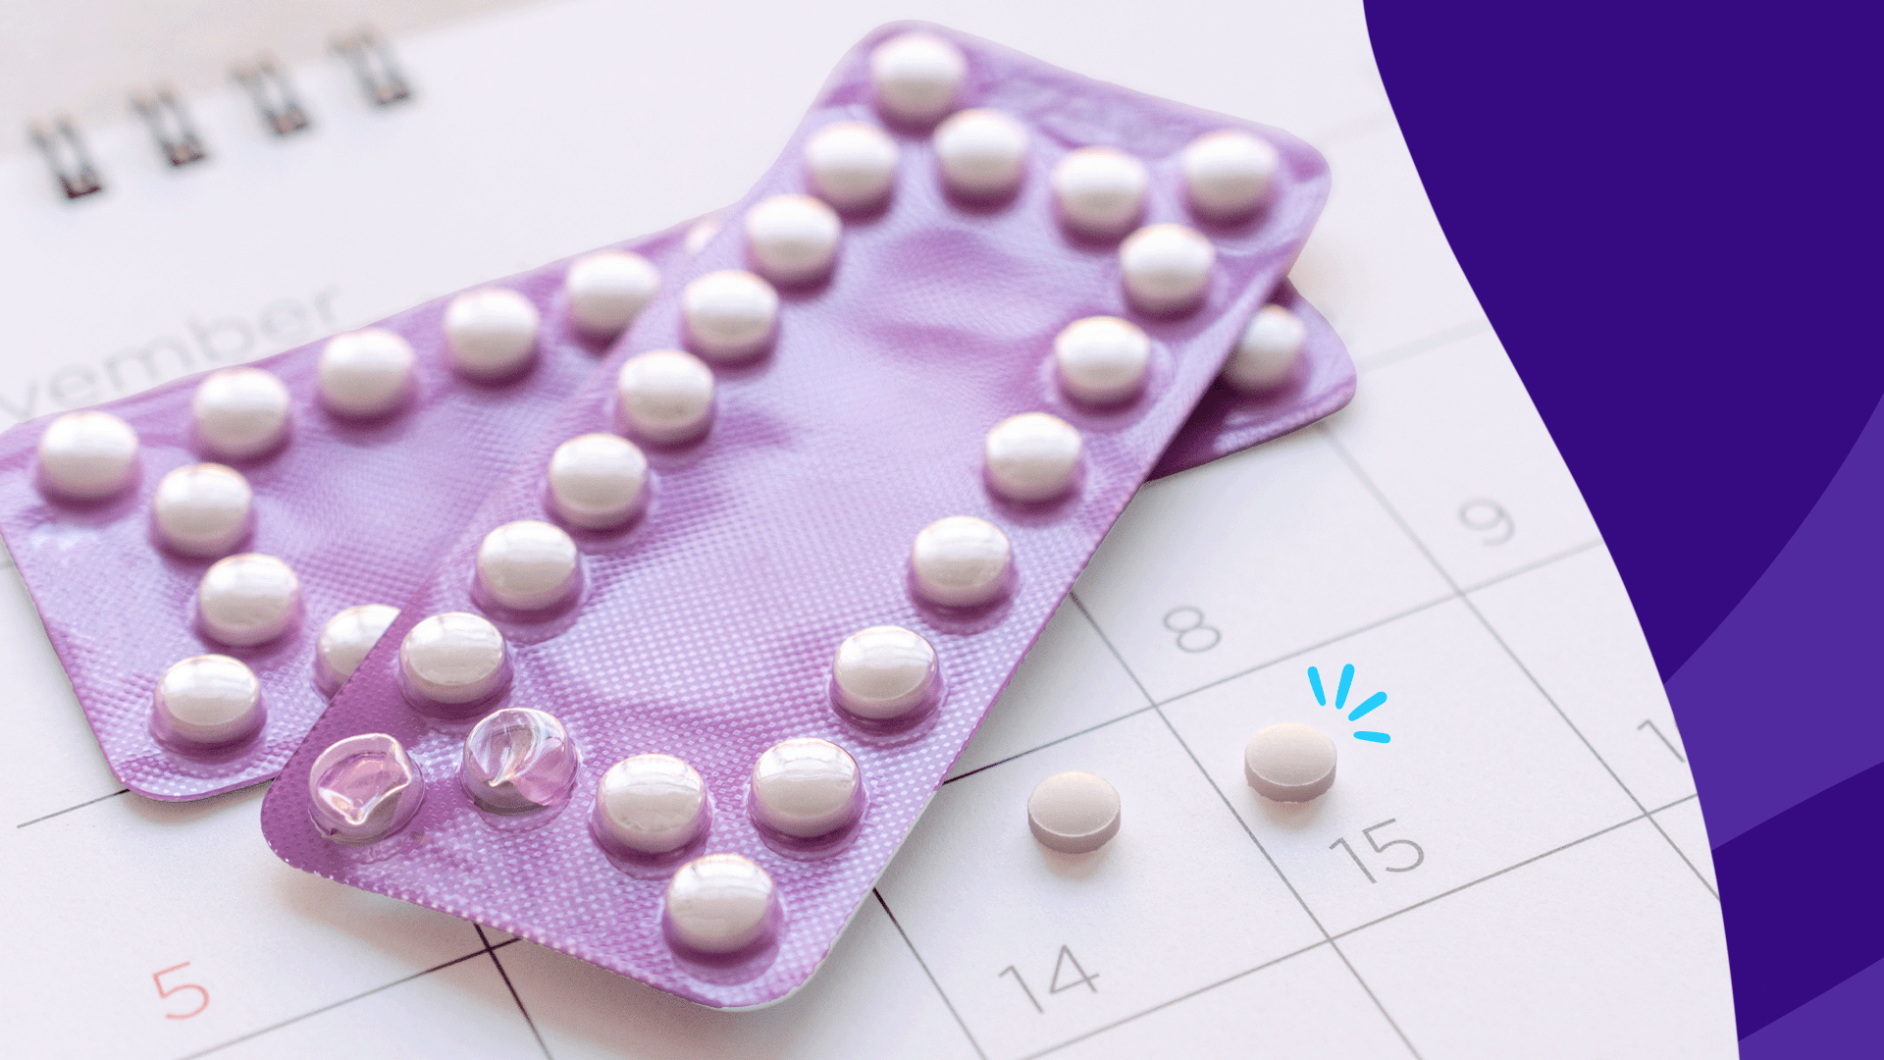 11 medications that interfere with birth control